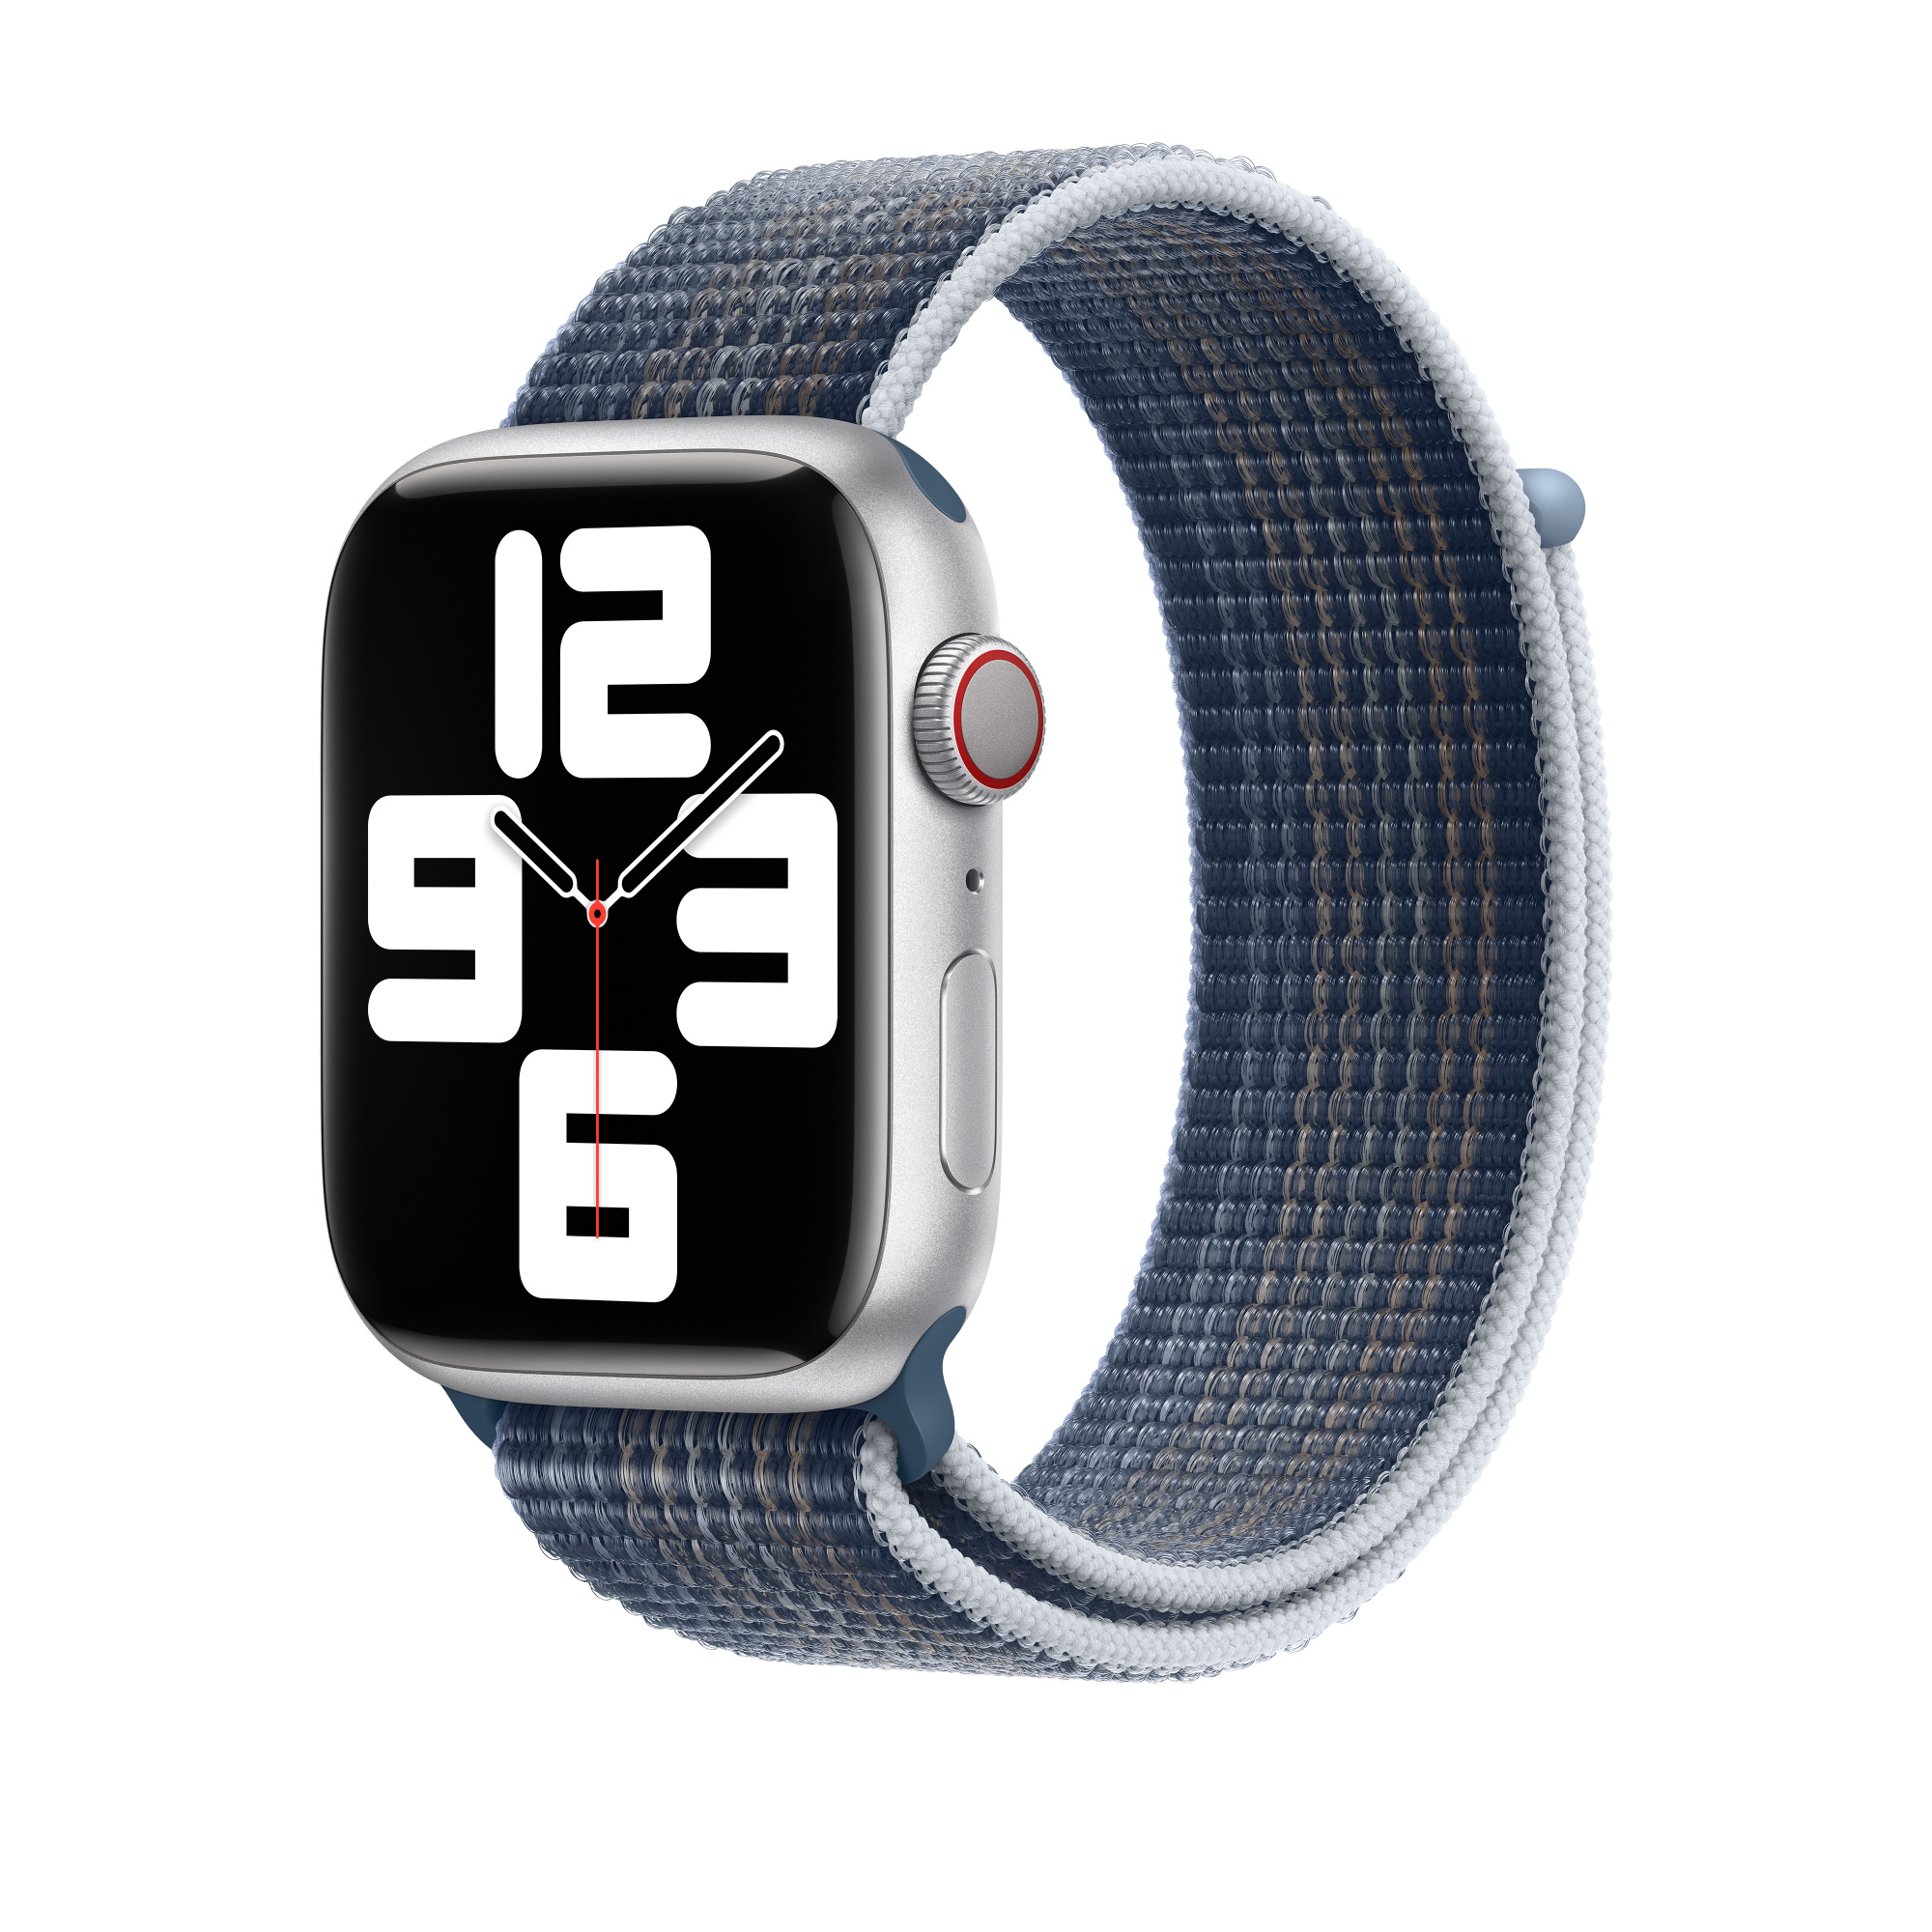 Photos - Smartwatch Band / Strap Apple MPLG3ZM/A Smart Wearable Accessories Band Blue Nylon 